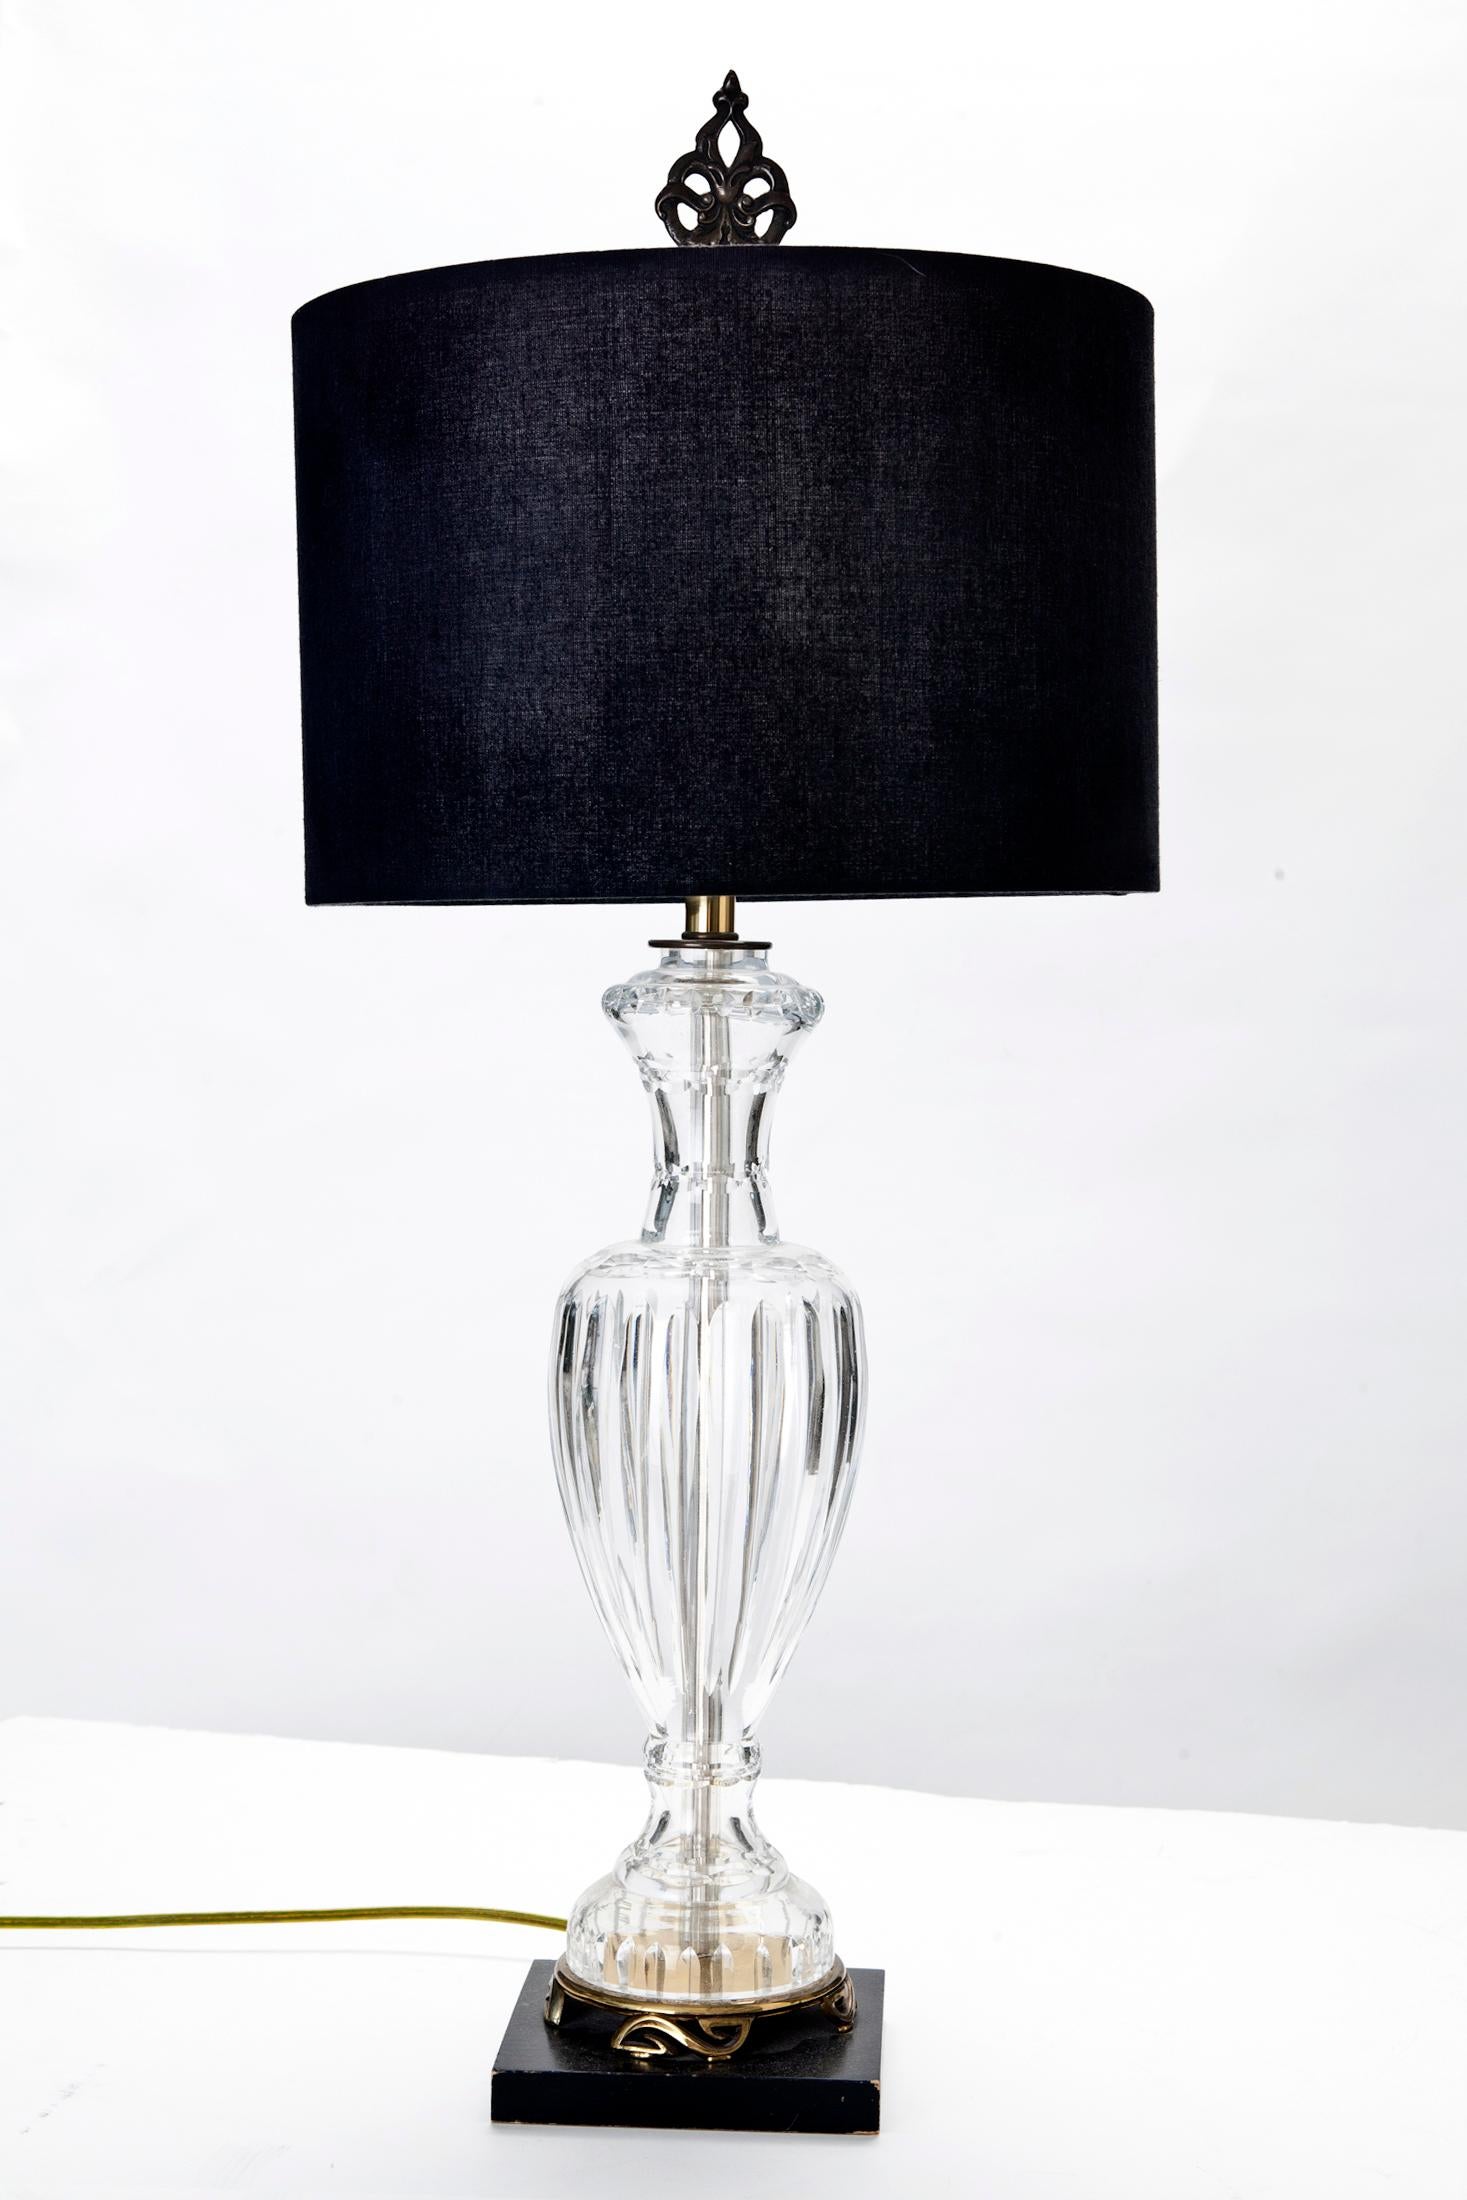 Stunning cut crystal table lamp attributed to Waterford, with ebony & brass base.
Shown with natural linen & black shades, both are available for an addition charge, with your inquiry.
Beautiful Brass finial is included.